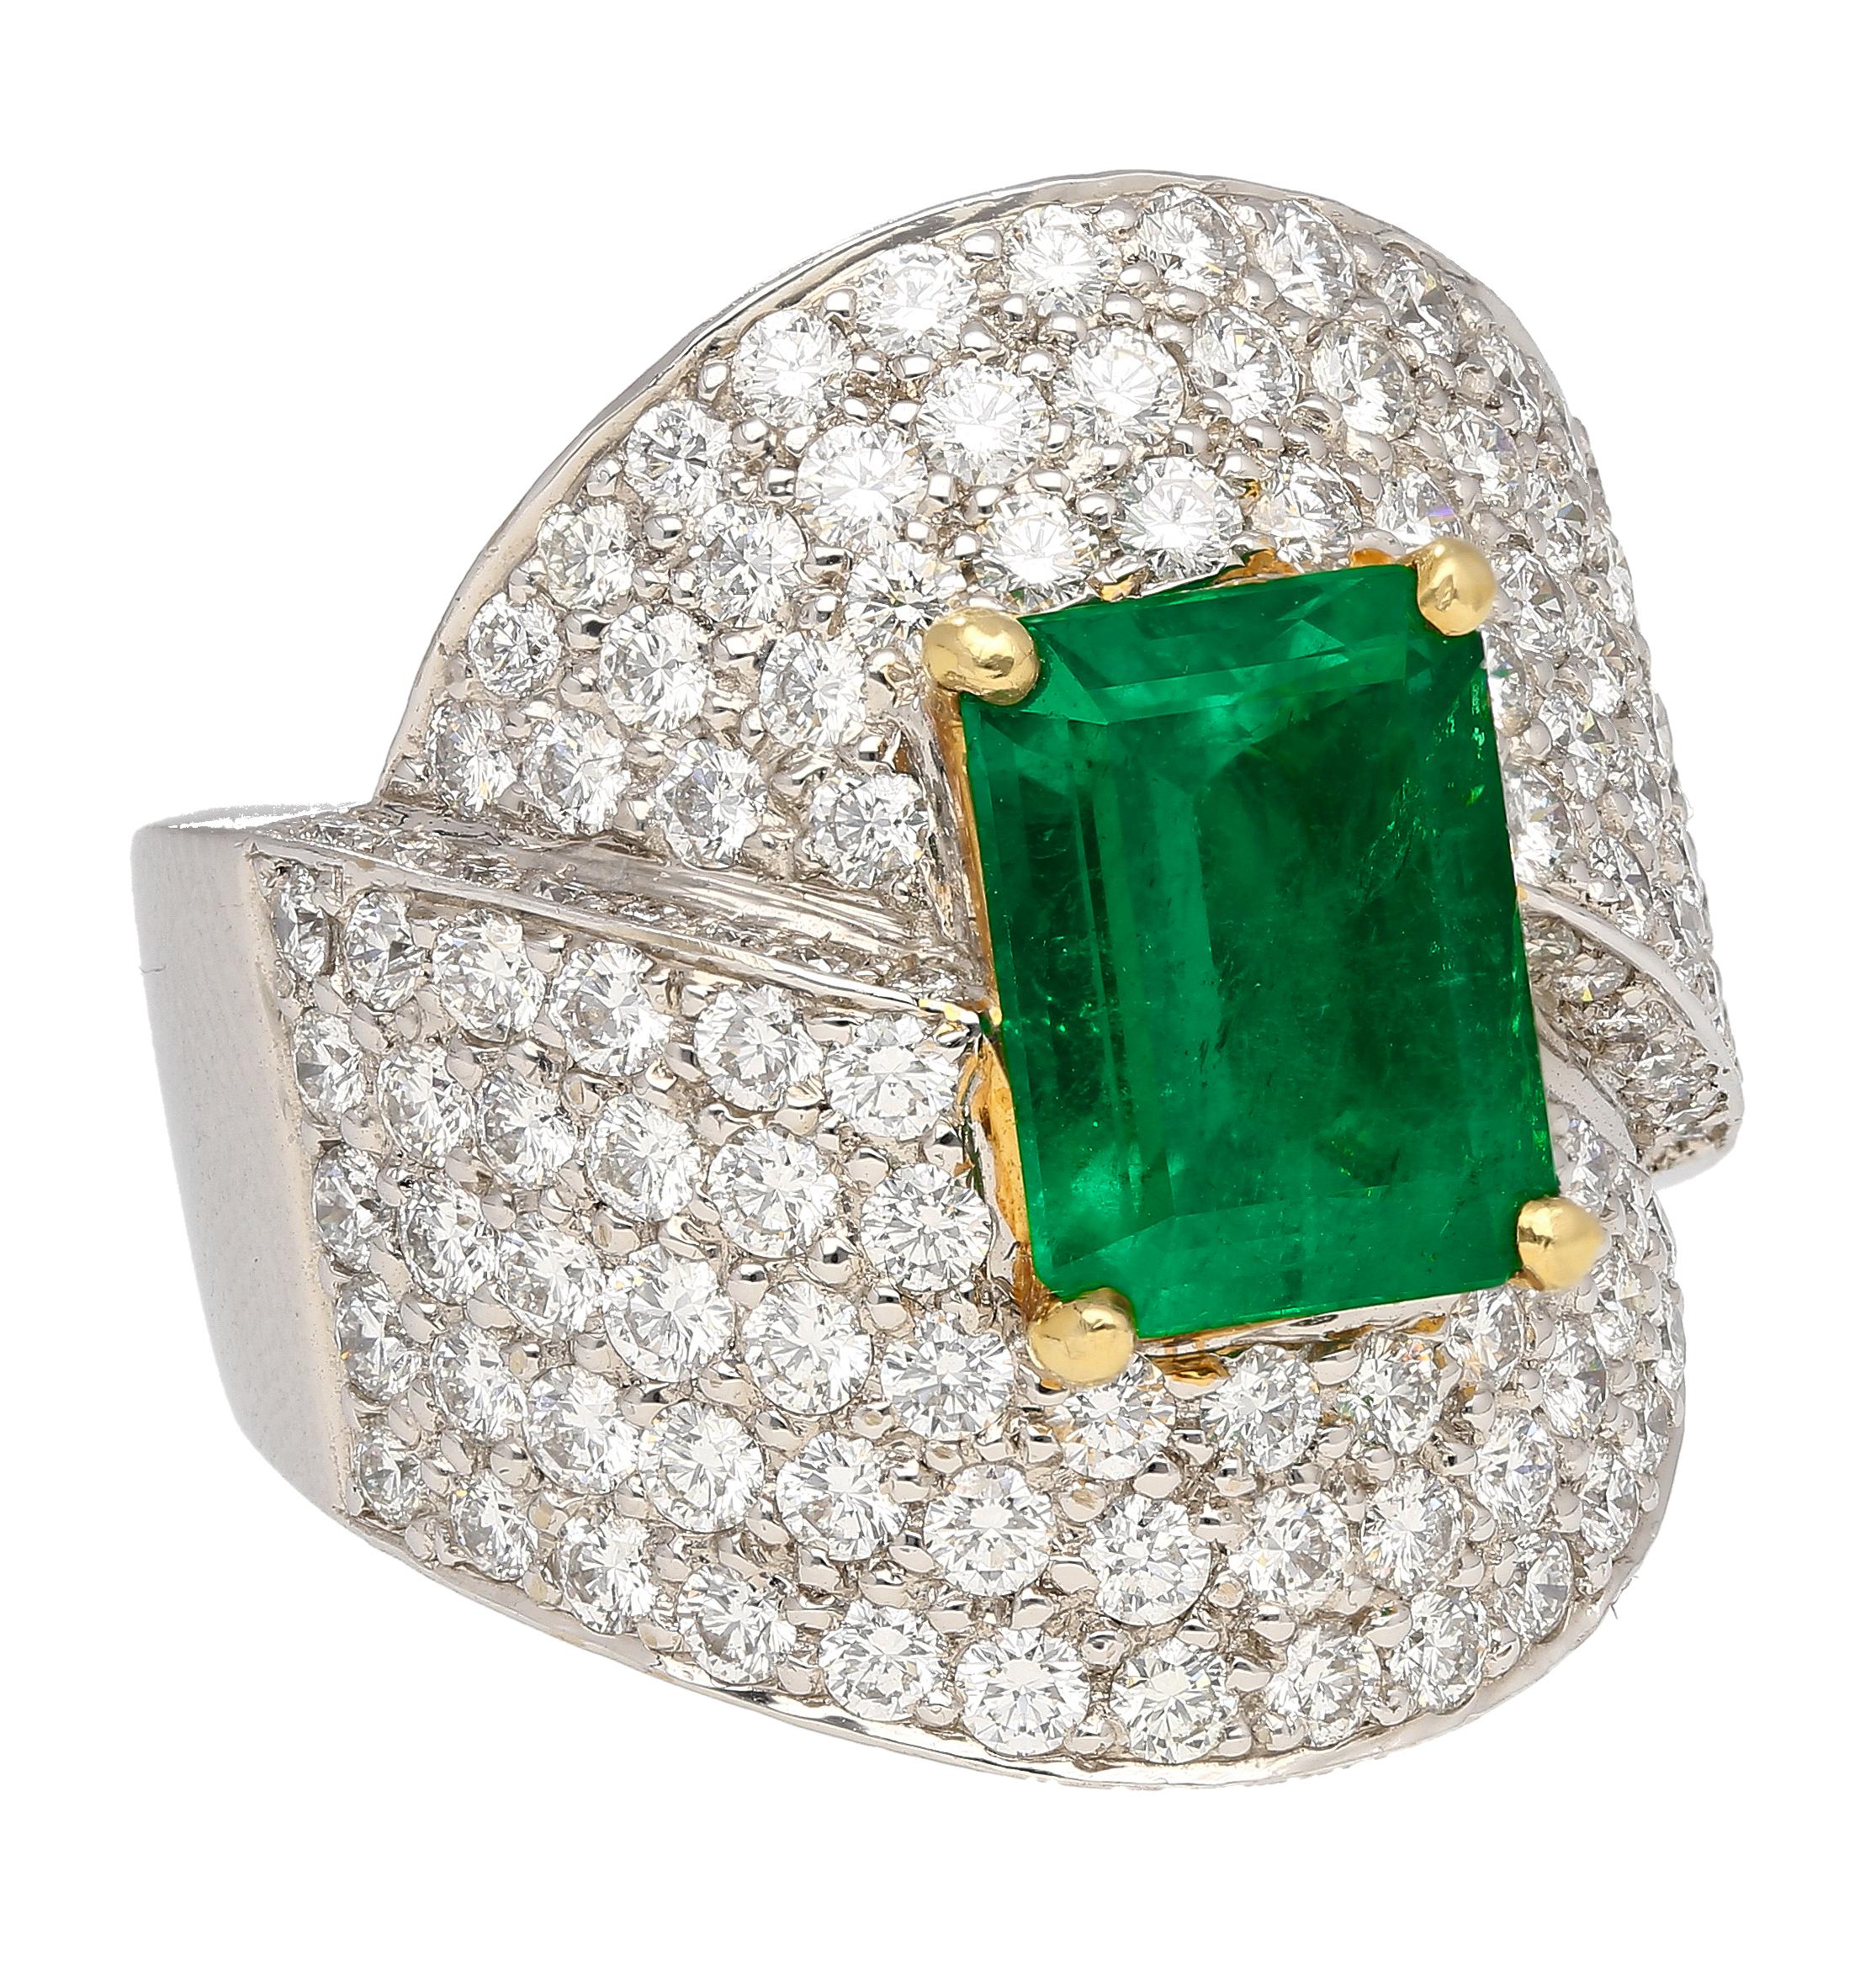 2.53-carat vivid green emerald cut natural emerald with 'minor' oil treatment. Set in 18k solid gold and 2.38 carats in round cut diamonds that form a stunning bypass ring design.

This Emerald was sourced from the famous Muzo Mine, located in the